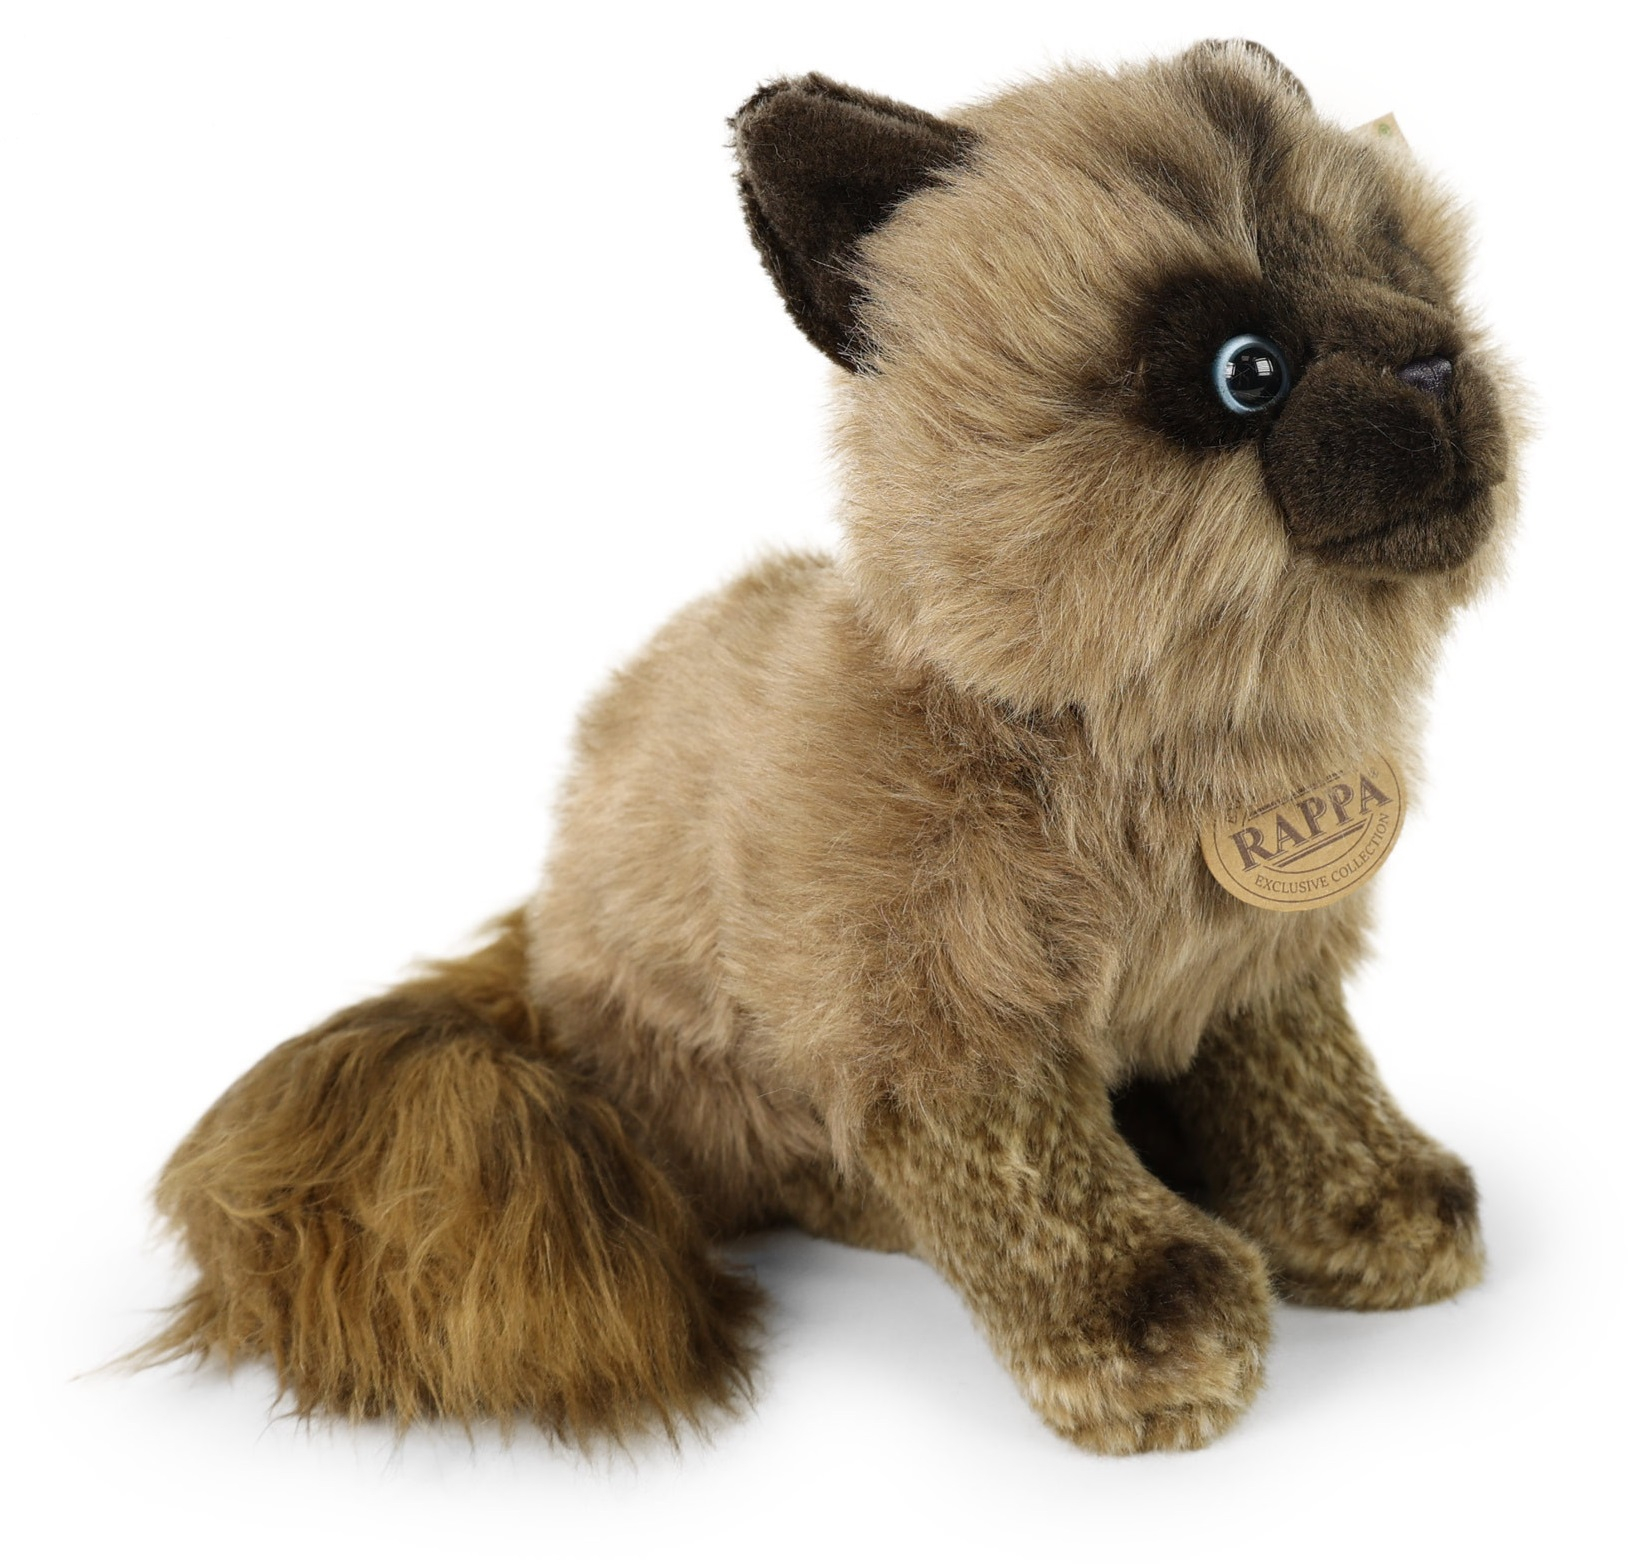 Peluche Chat Siamois - Keel Toys - Jolie peluche chat